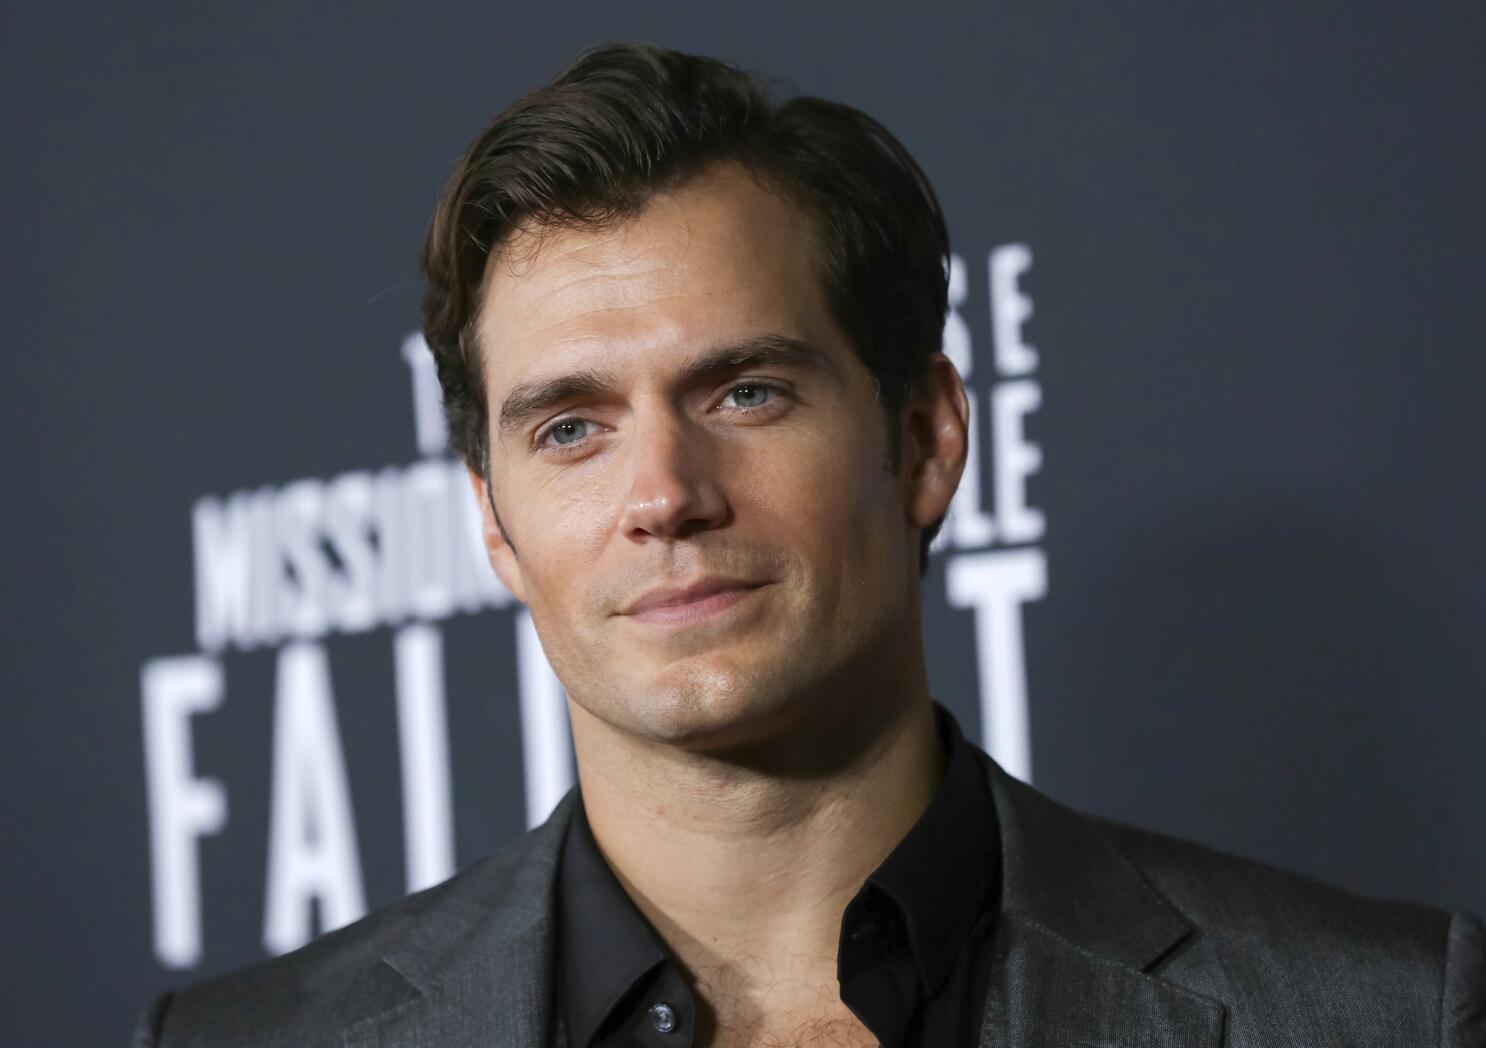 Henry Cavill “lost control“ while filming a sensitive scene with a female co-star in The Tudors